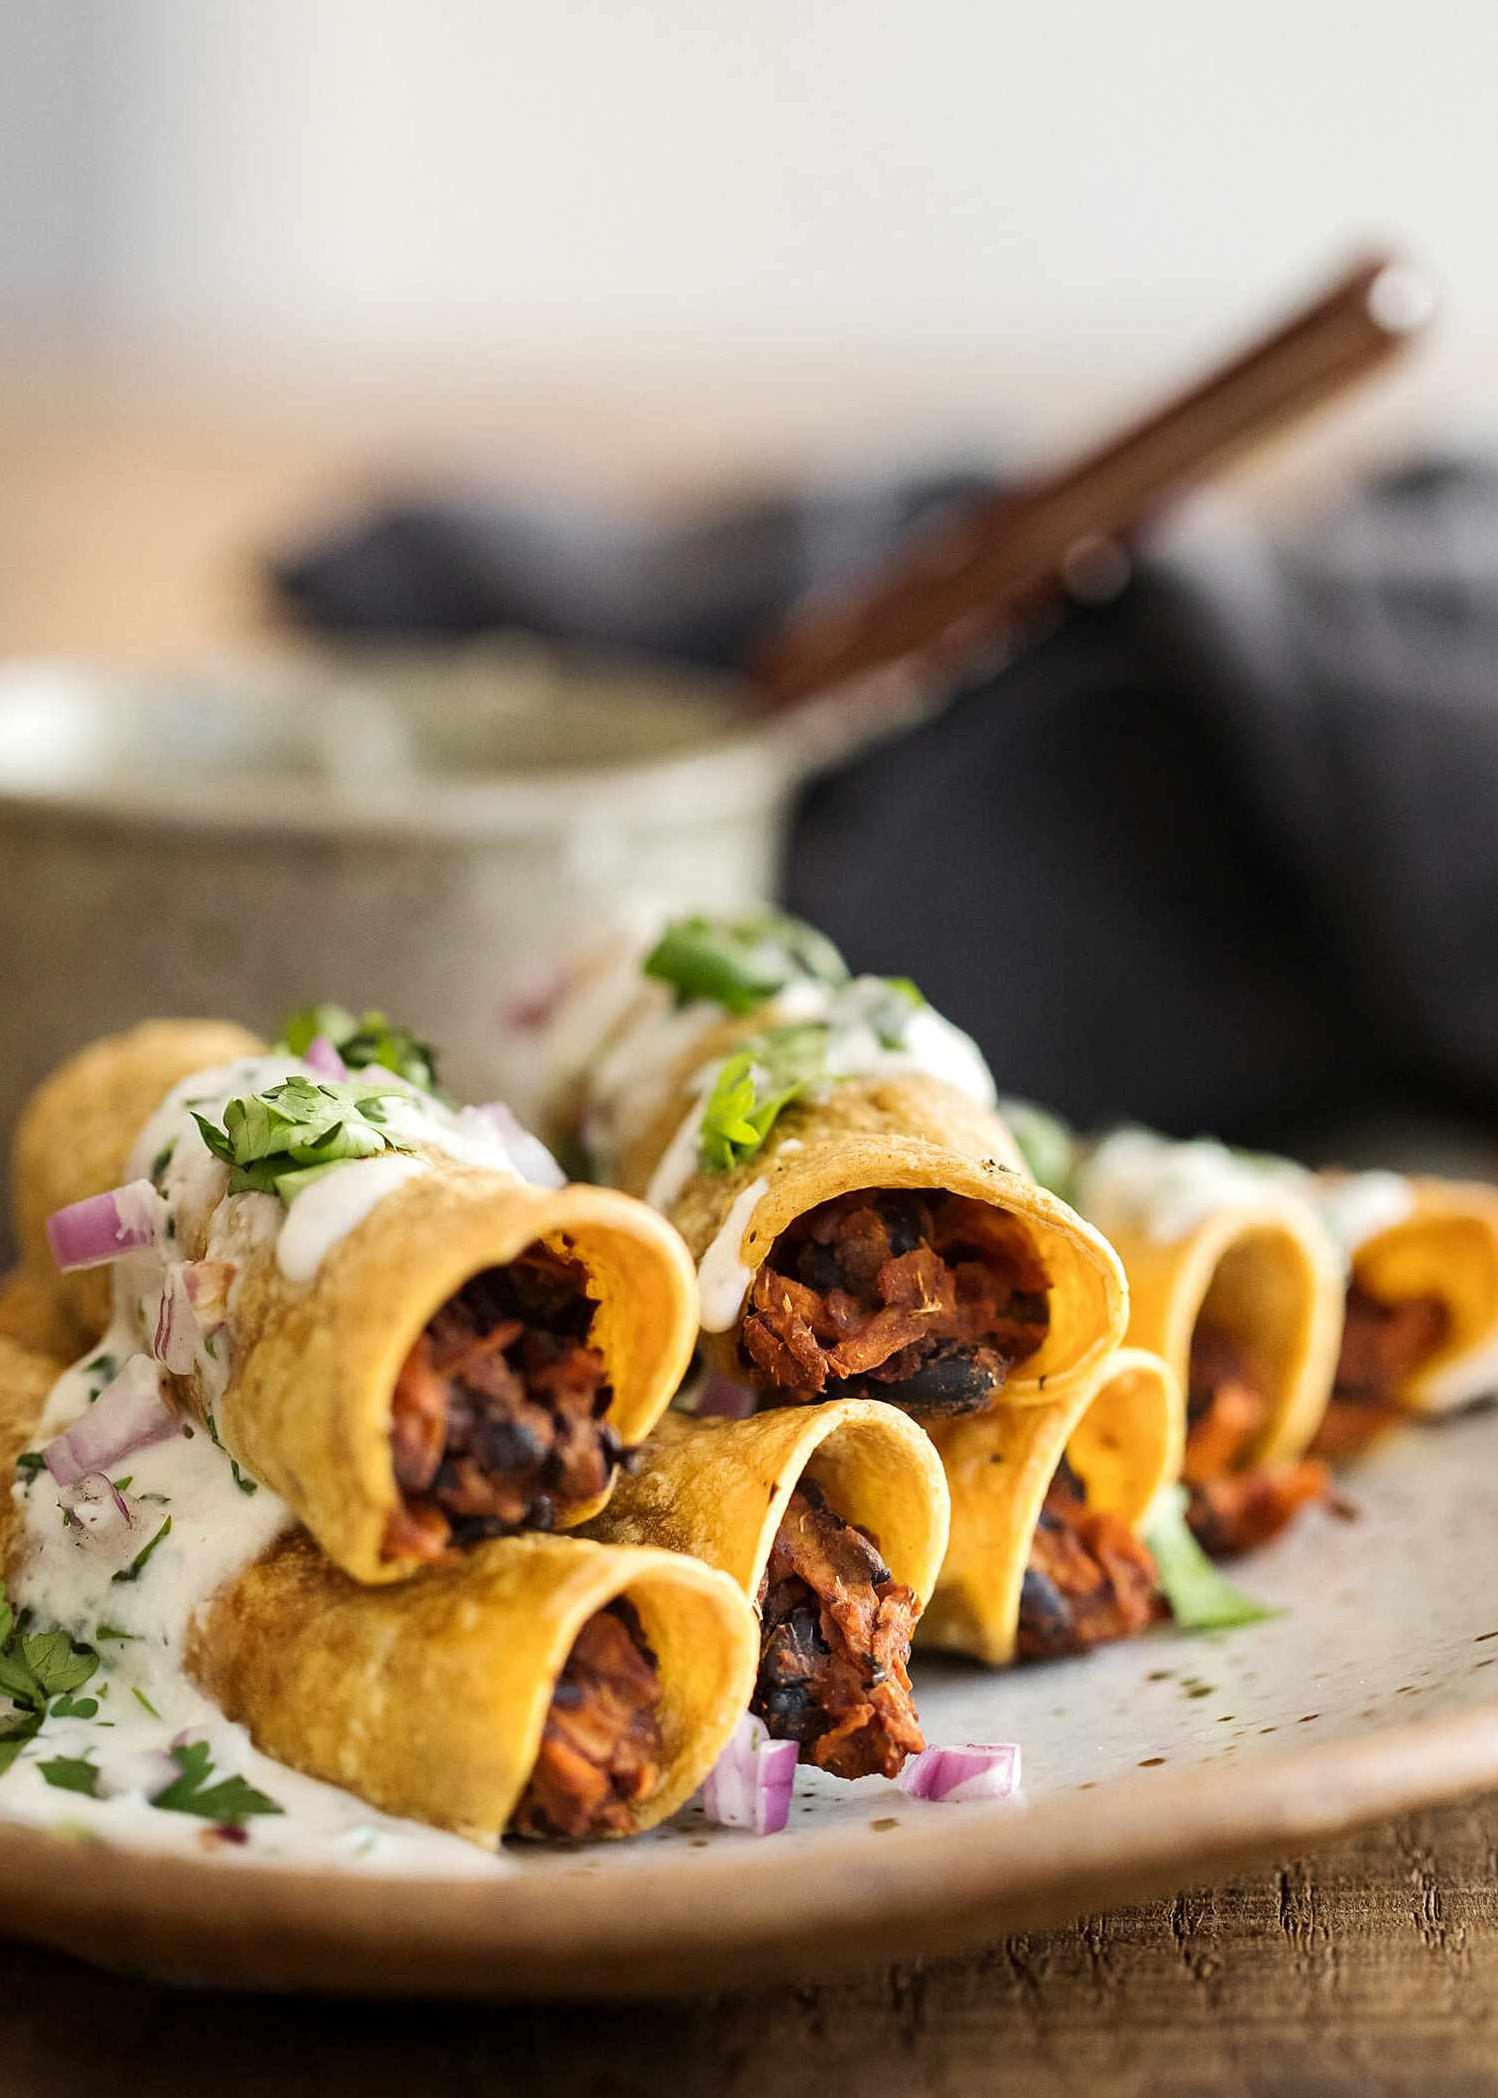  Creamy sweet potato, black beans, and melty cheese - a match made in heaven.